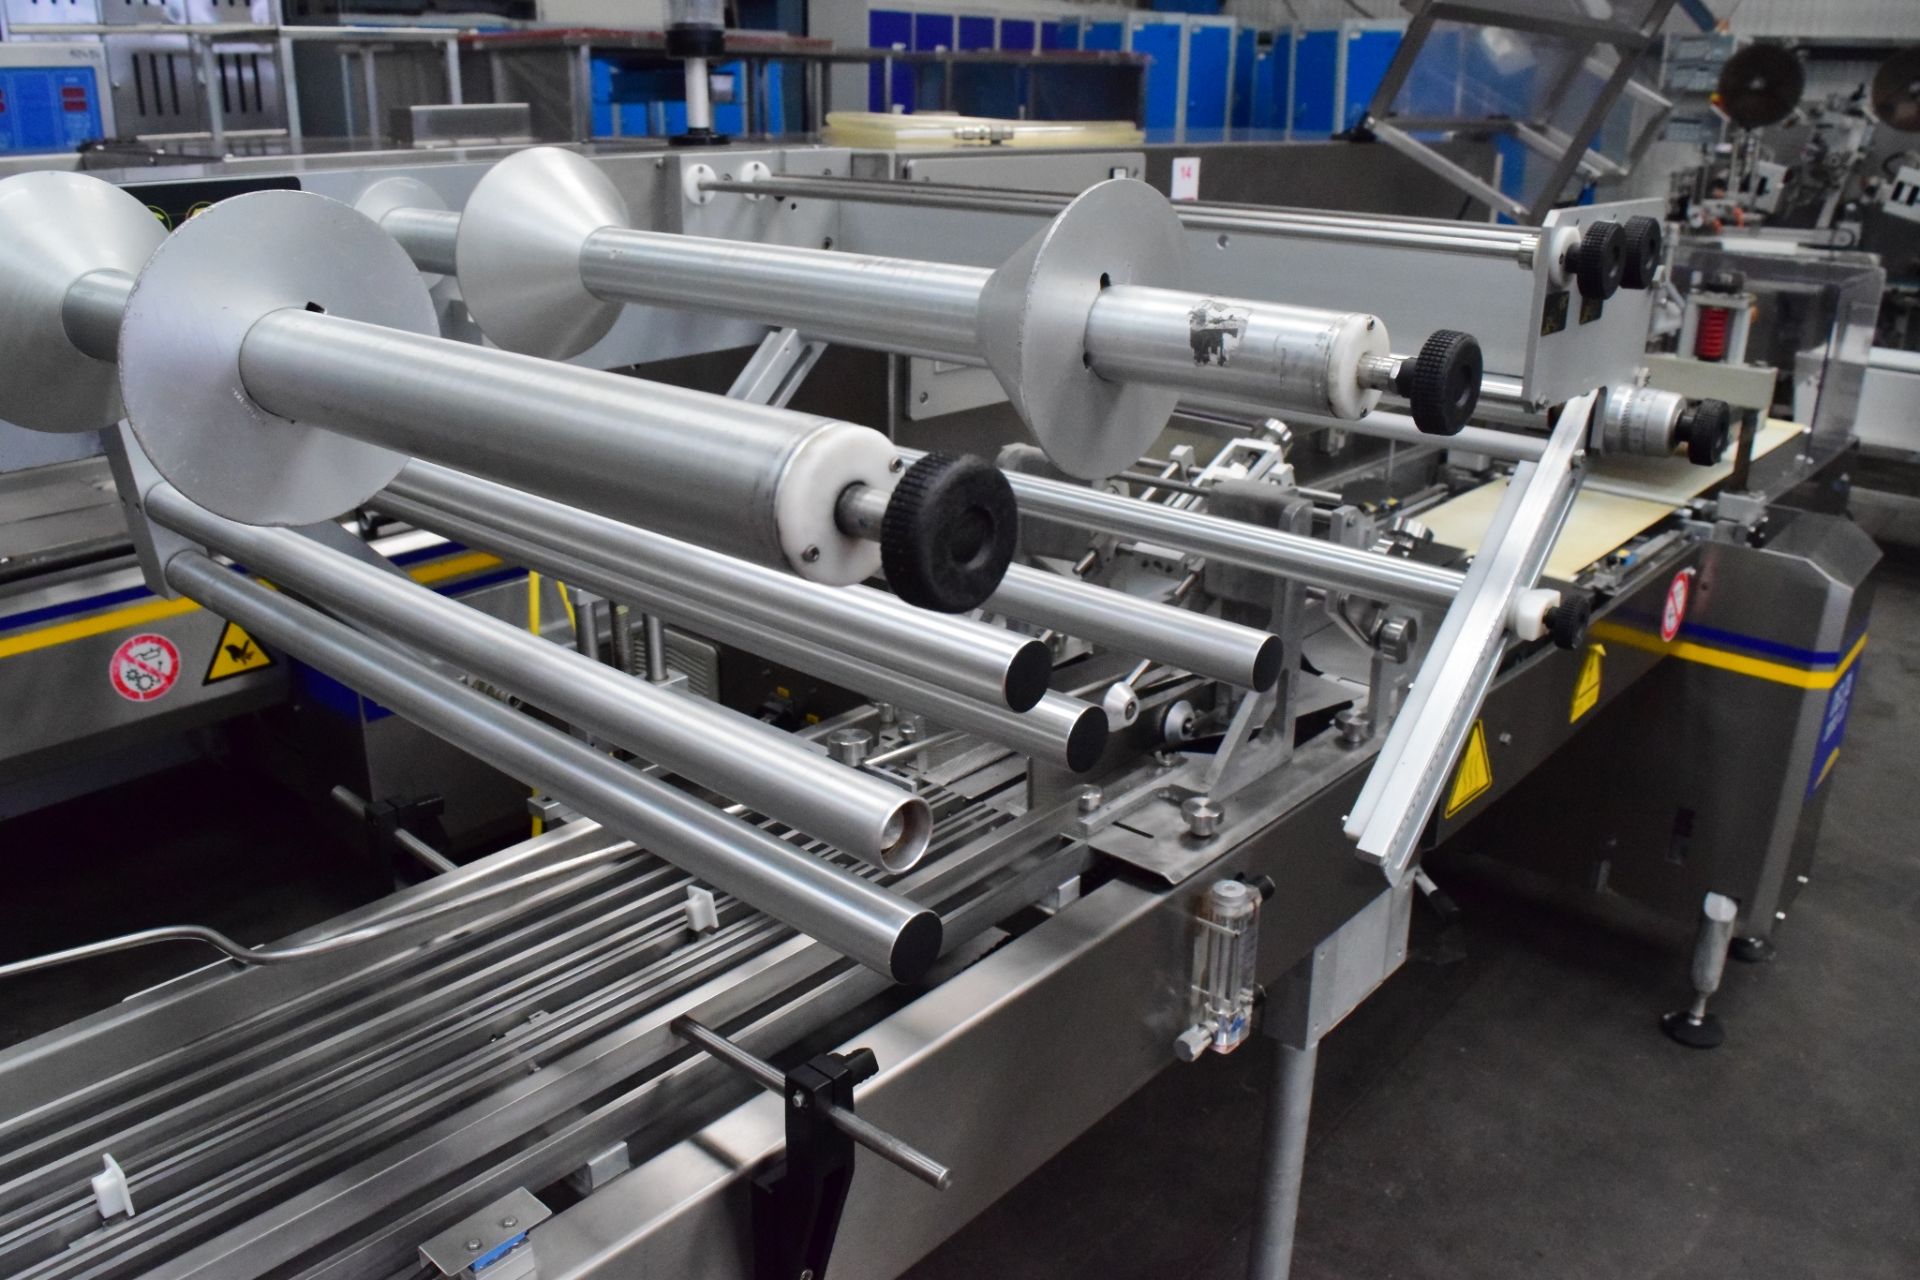 Ilapak Delta 2000LD Flowwrapper. Flexible flow wrapping machine ideally suited for a wide range of - Image 10 of 10